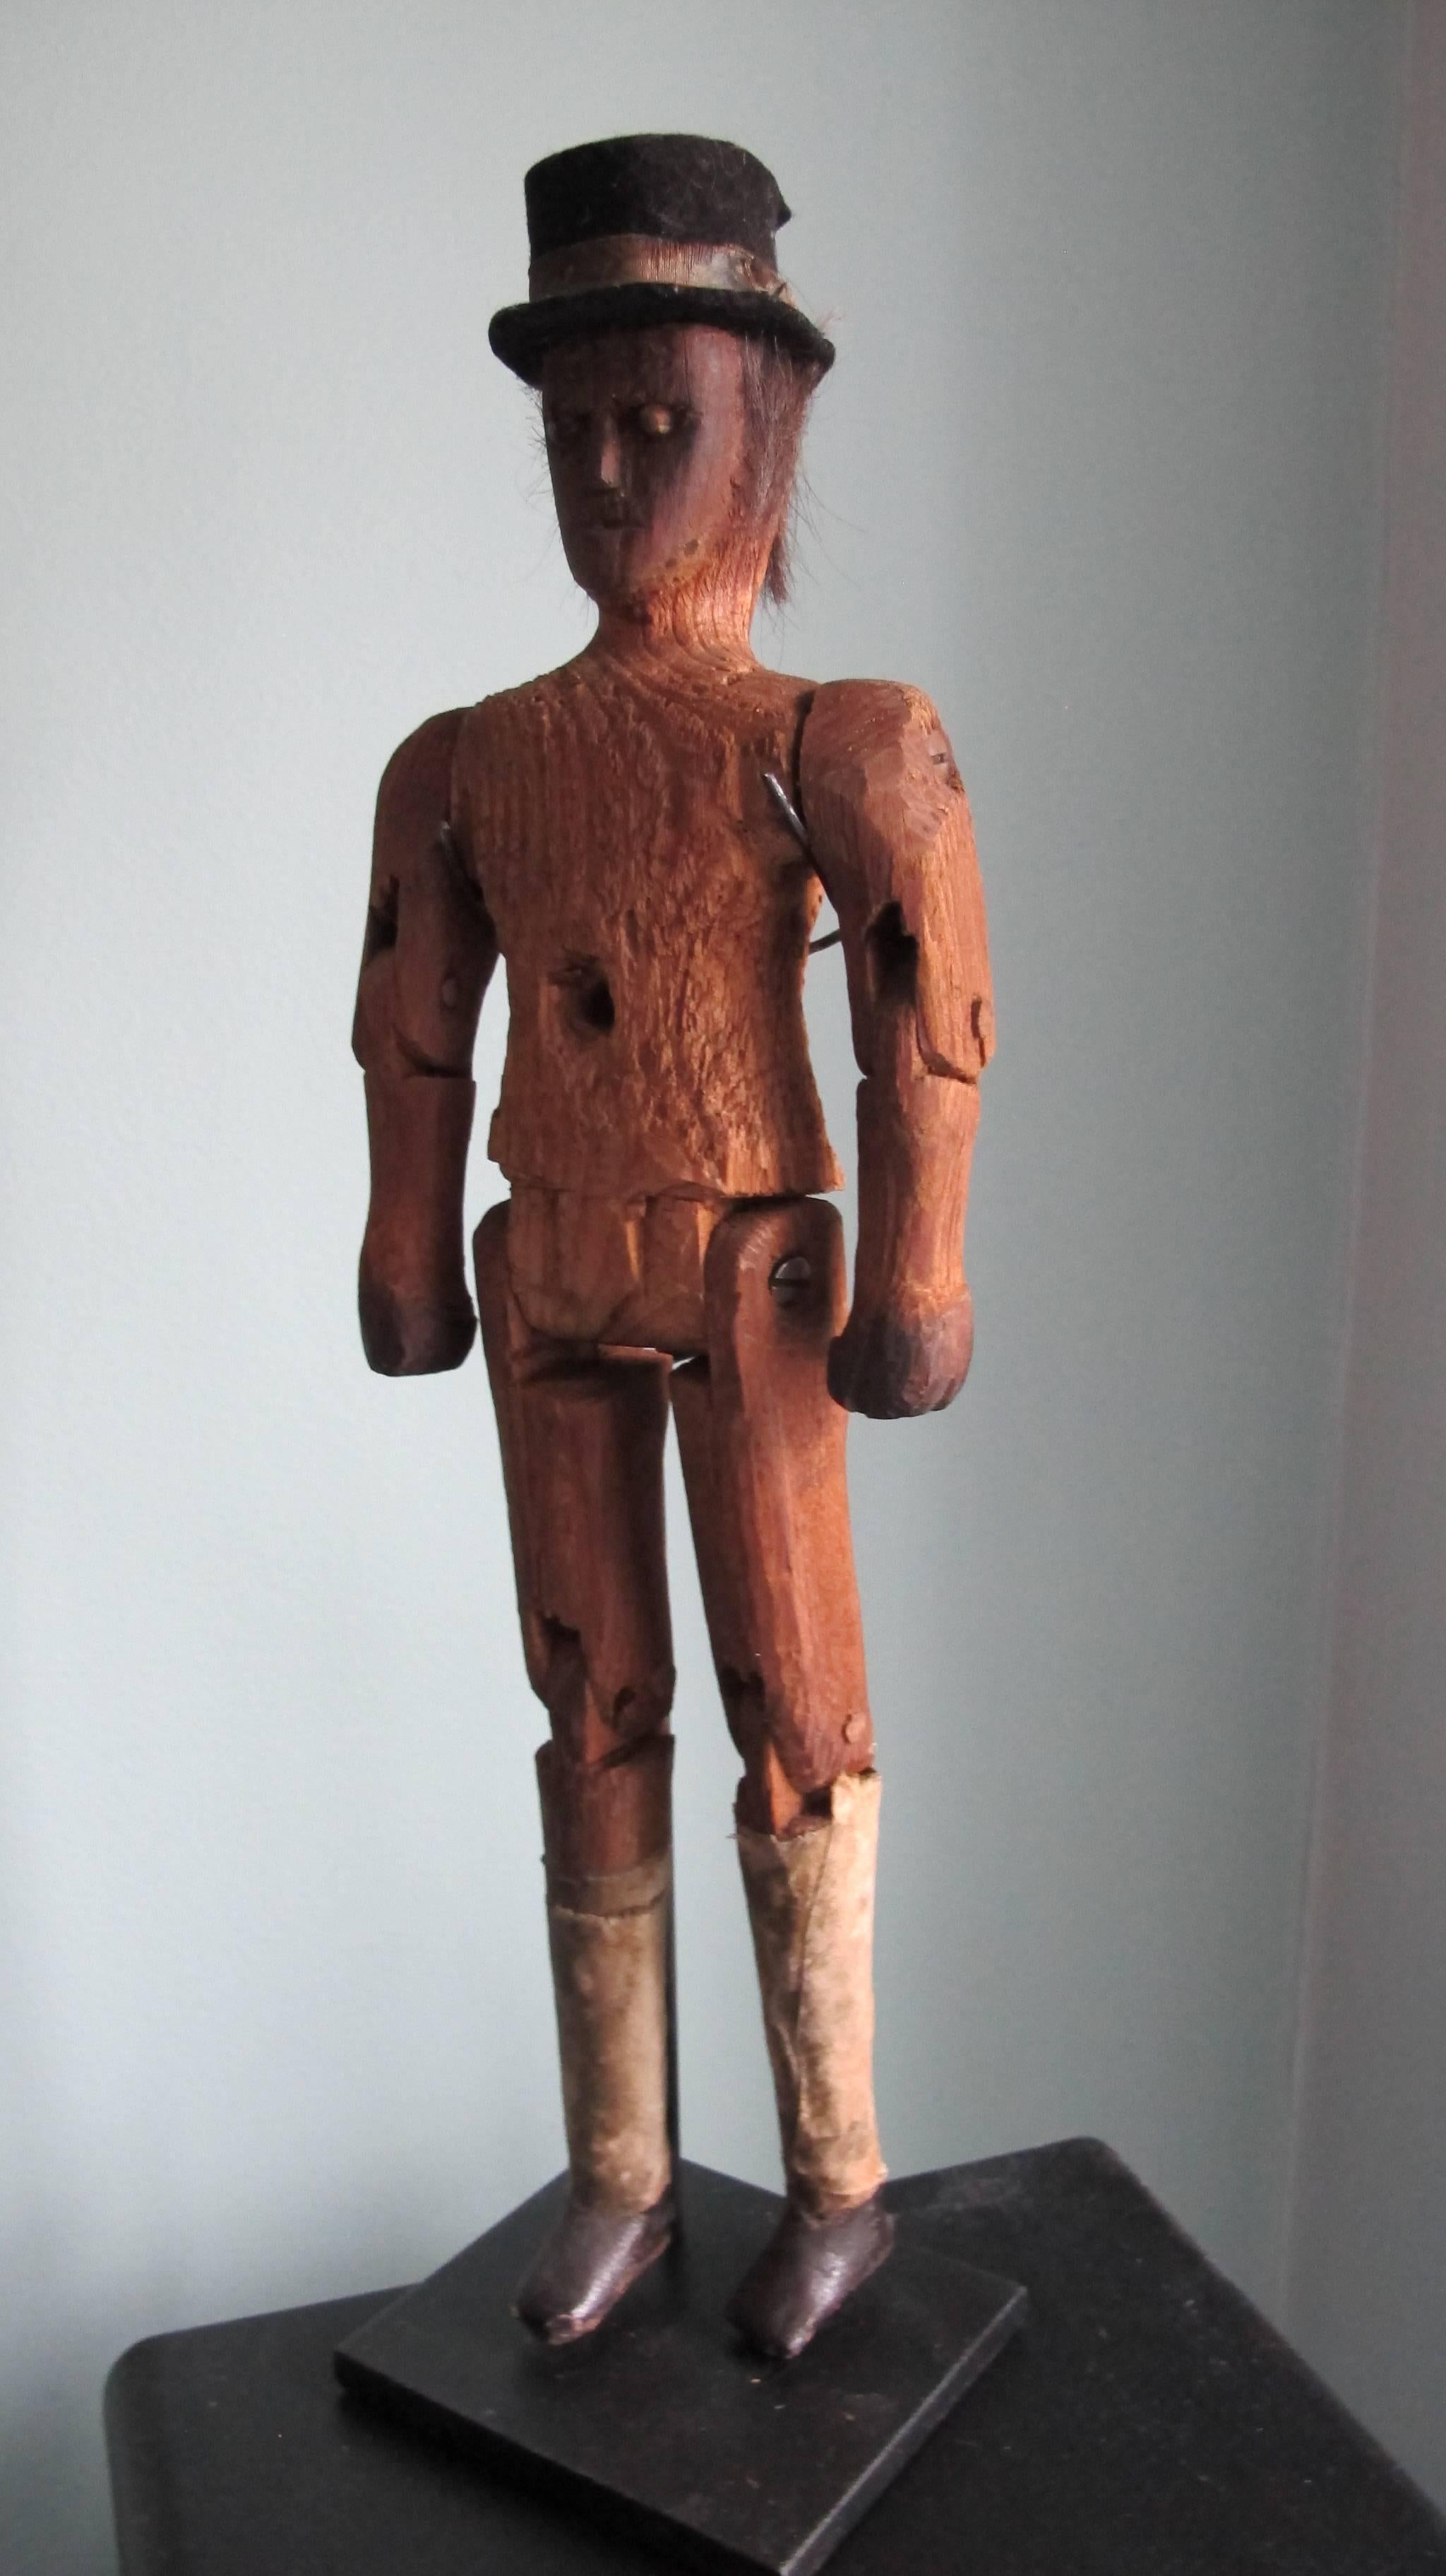 Carved wood figure with moveable arms and legs and hole in chest for inserting a stick to make it walk or dance. The head has bead eyes with pin centres and cloth top hat and hair. The black painted shoes have knickers above of adhered cloth. There